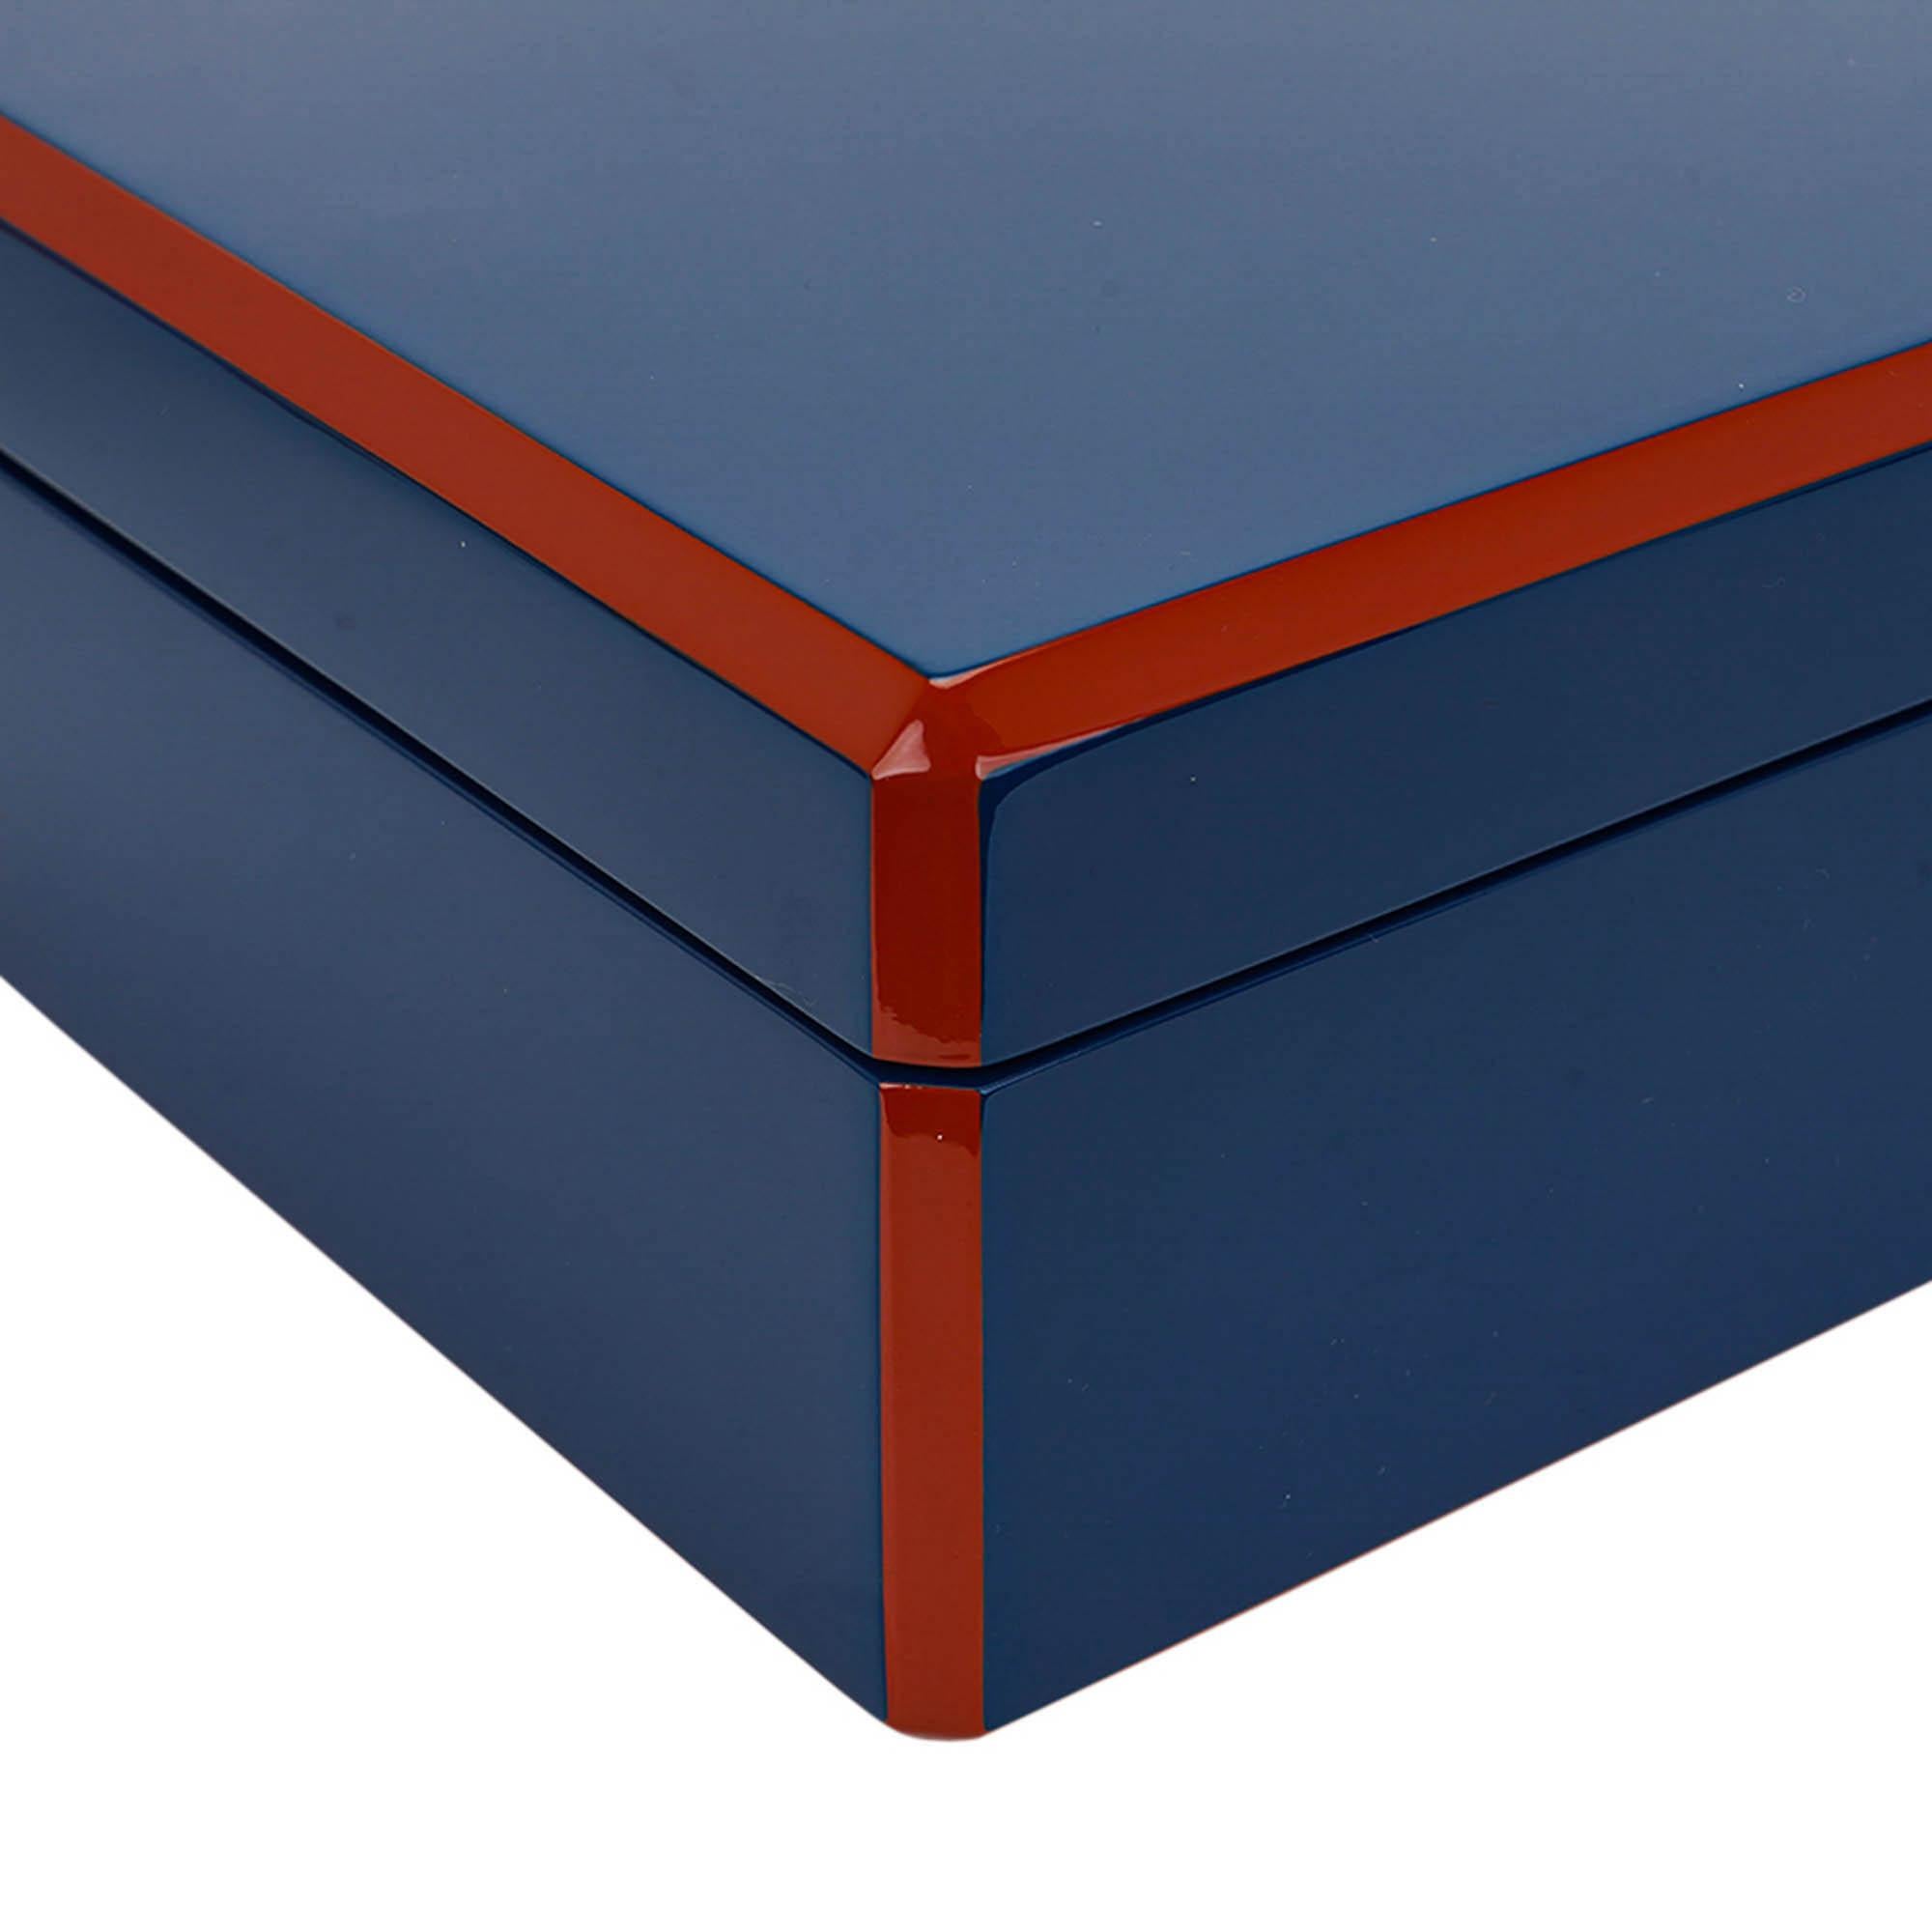 Mightychic offers an Hermes Facettes Tie Box featured in Biarritz Bleu and Terrecotta.
Beautifully showcased in shiny hand lacquered wood logo engraved.
Interior is in a matte lacquer and has a removable divider to organize up to 8 ties.
Made in